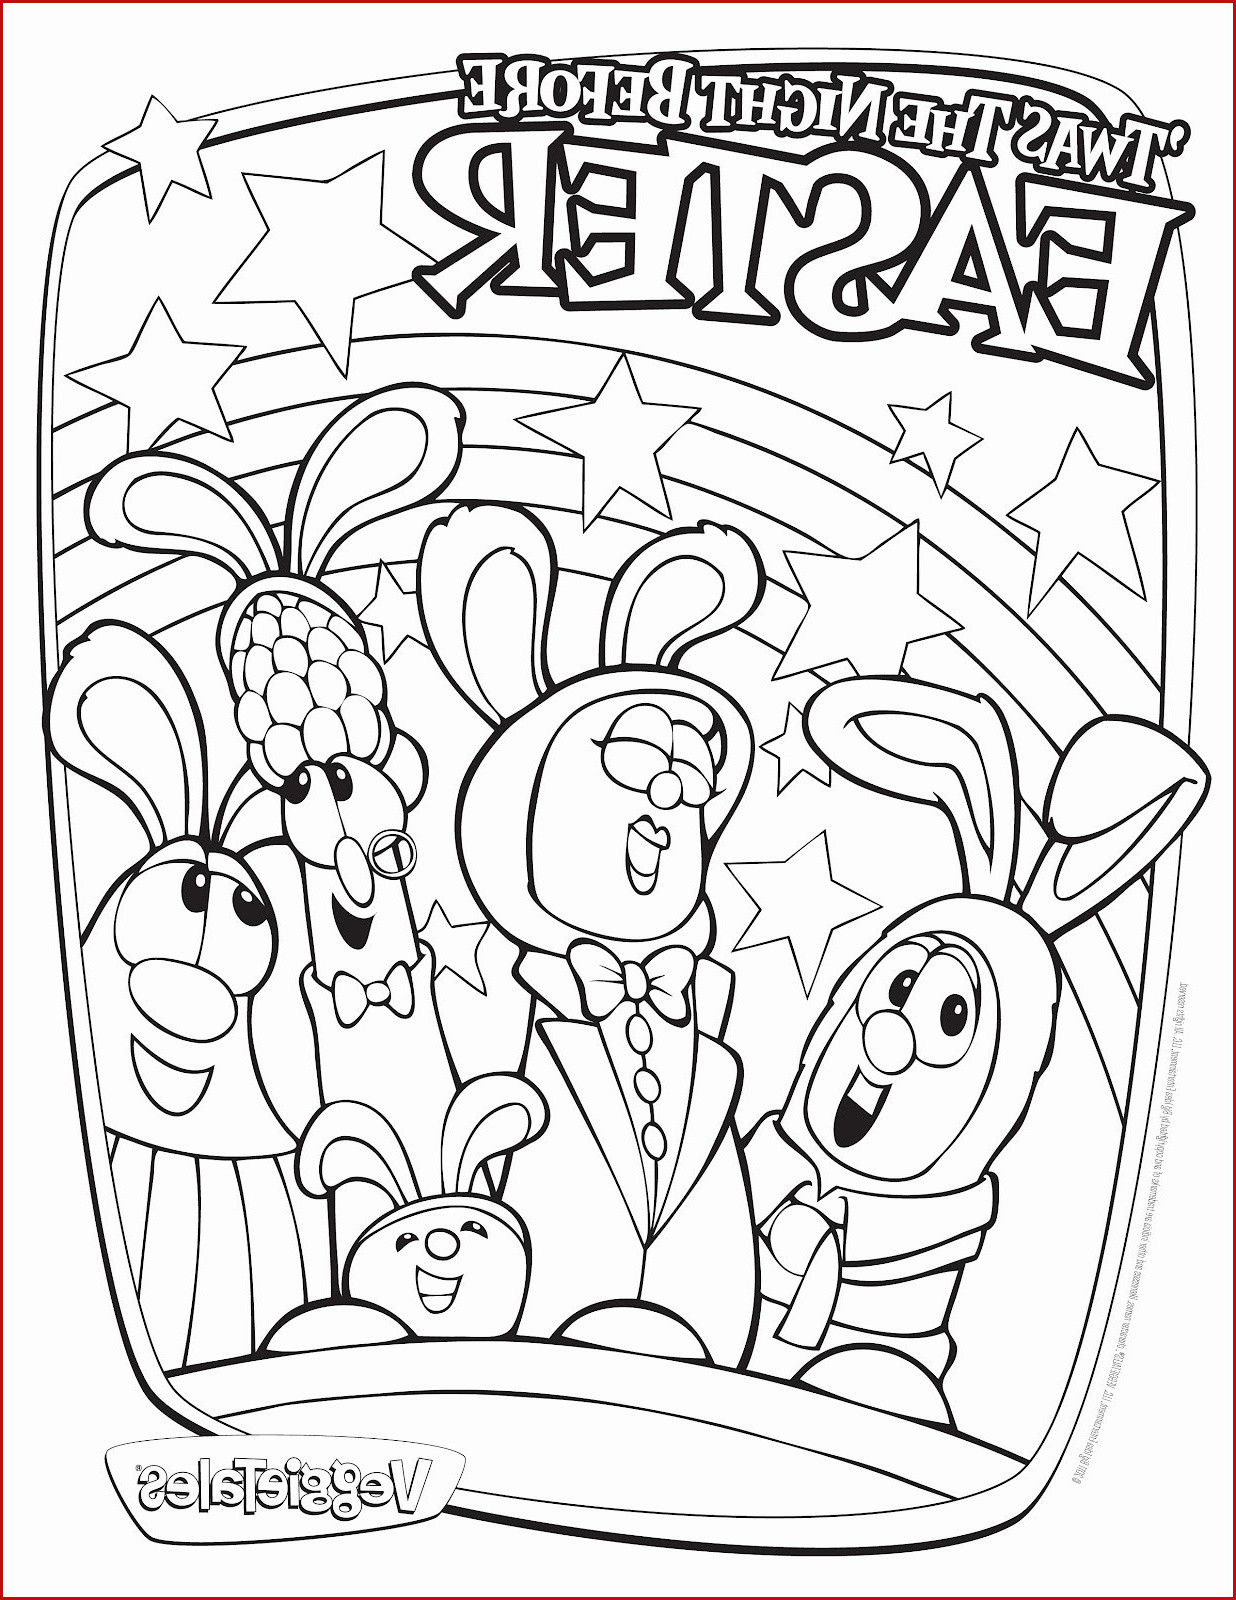 forest coloring sheet new stock coloring pages for easter easter coloring pages free of forest coloring sheet